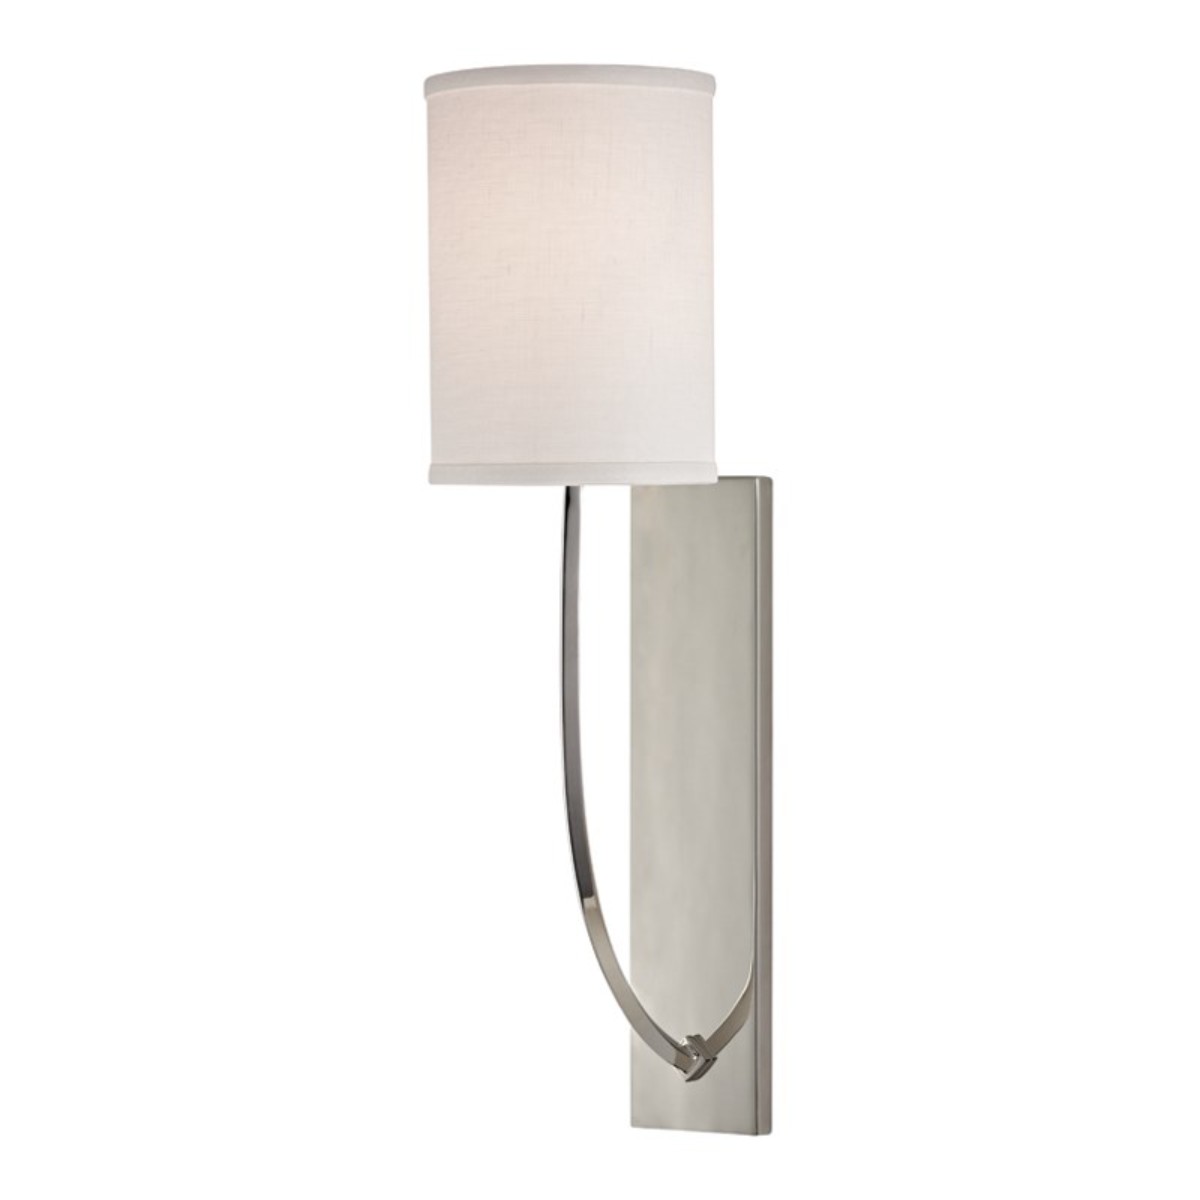 Hudson Valley Colton Wall Light Polished Nickel